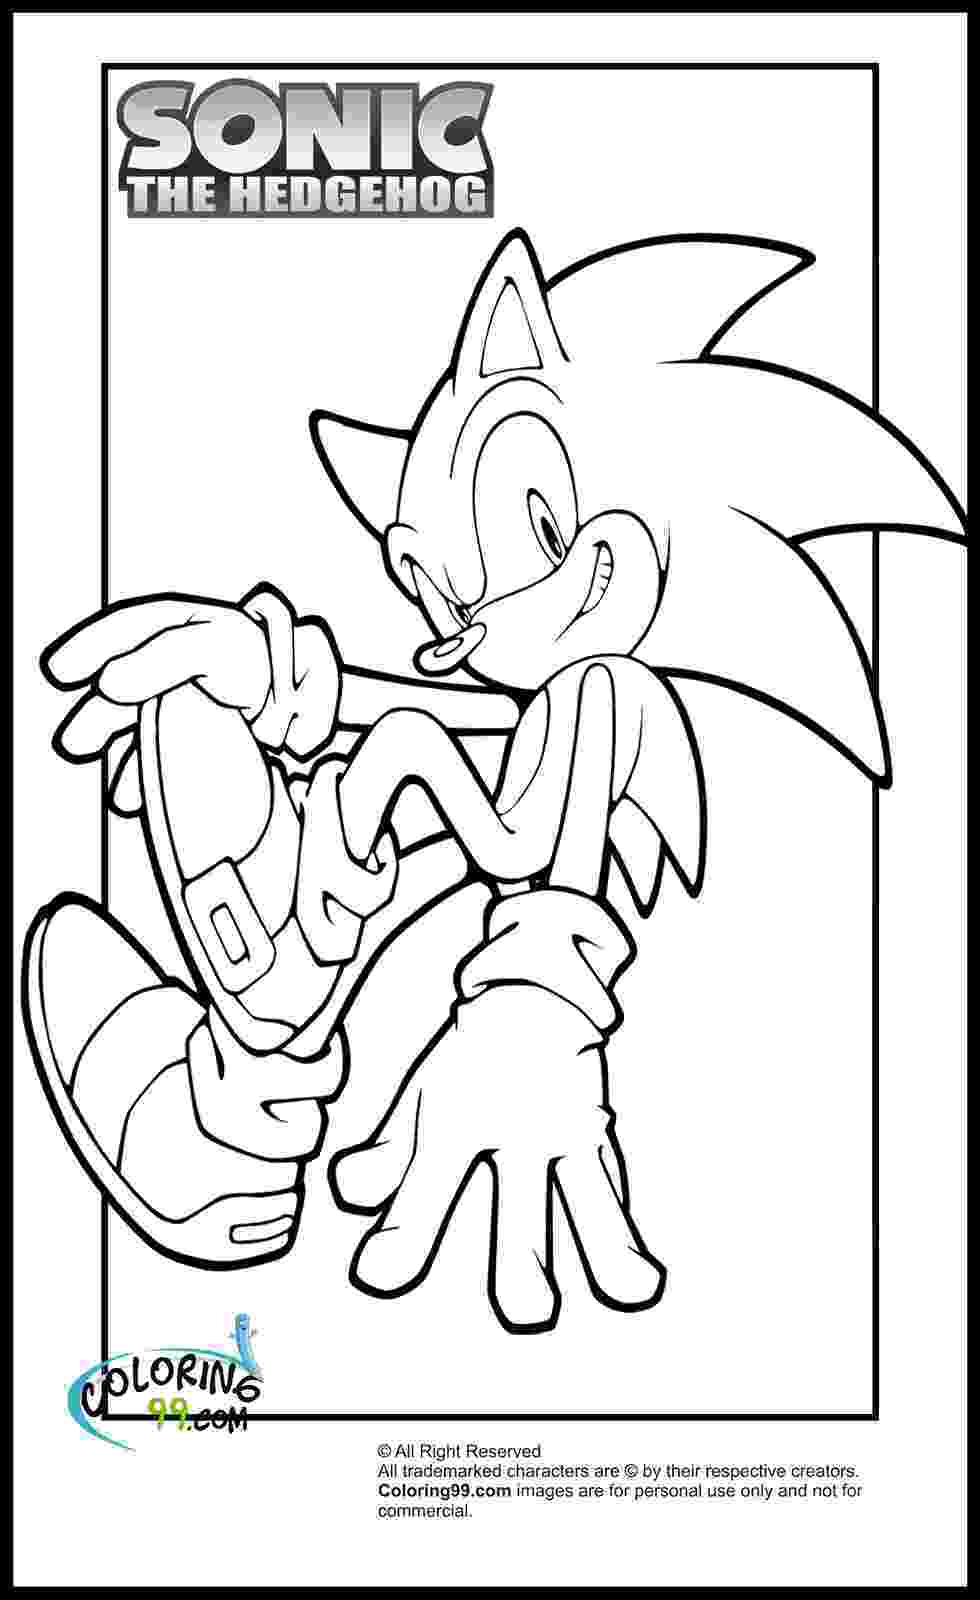 sonic the hedgehog coloring pages sonic the hedgehog coloring pages getcoloringpagescom the coloring pages hedgehog sonic 